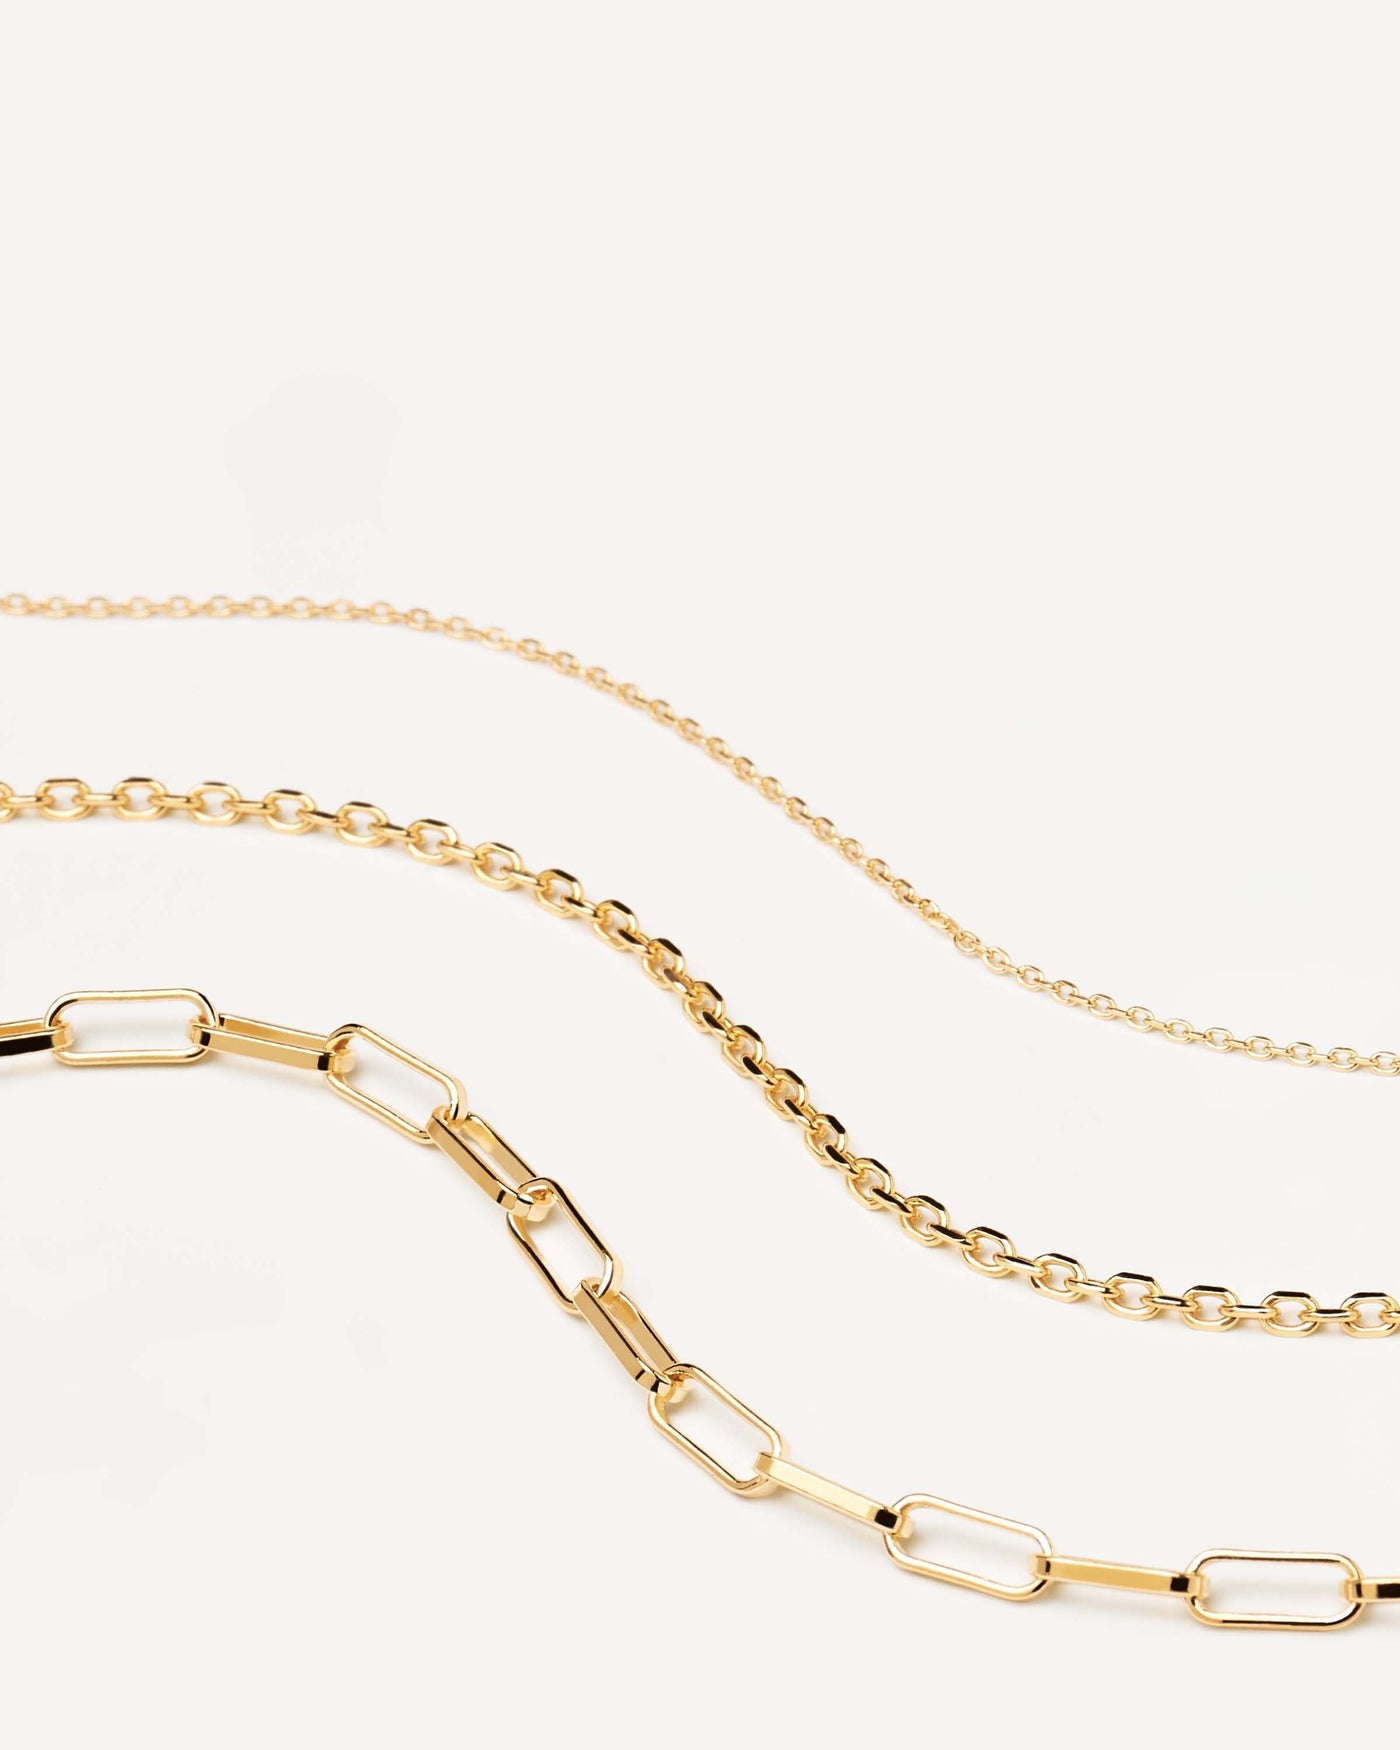 2023 Selection | Essential Necklaces Set. Set of stackable 18k gold plated silver chain necklaces in three link sizes and shapes. Get the latest arrival from PDPAOLA. Place your order safely and get this Best Seller. Free Shipping.